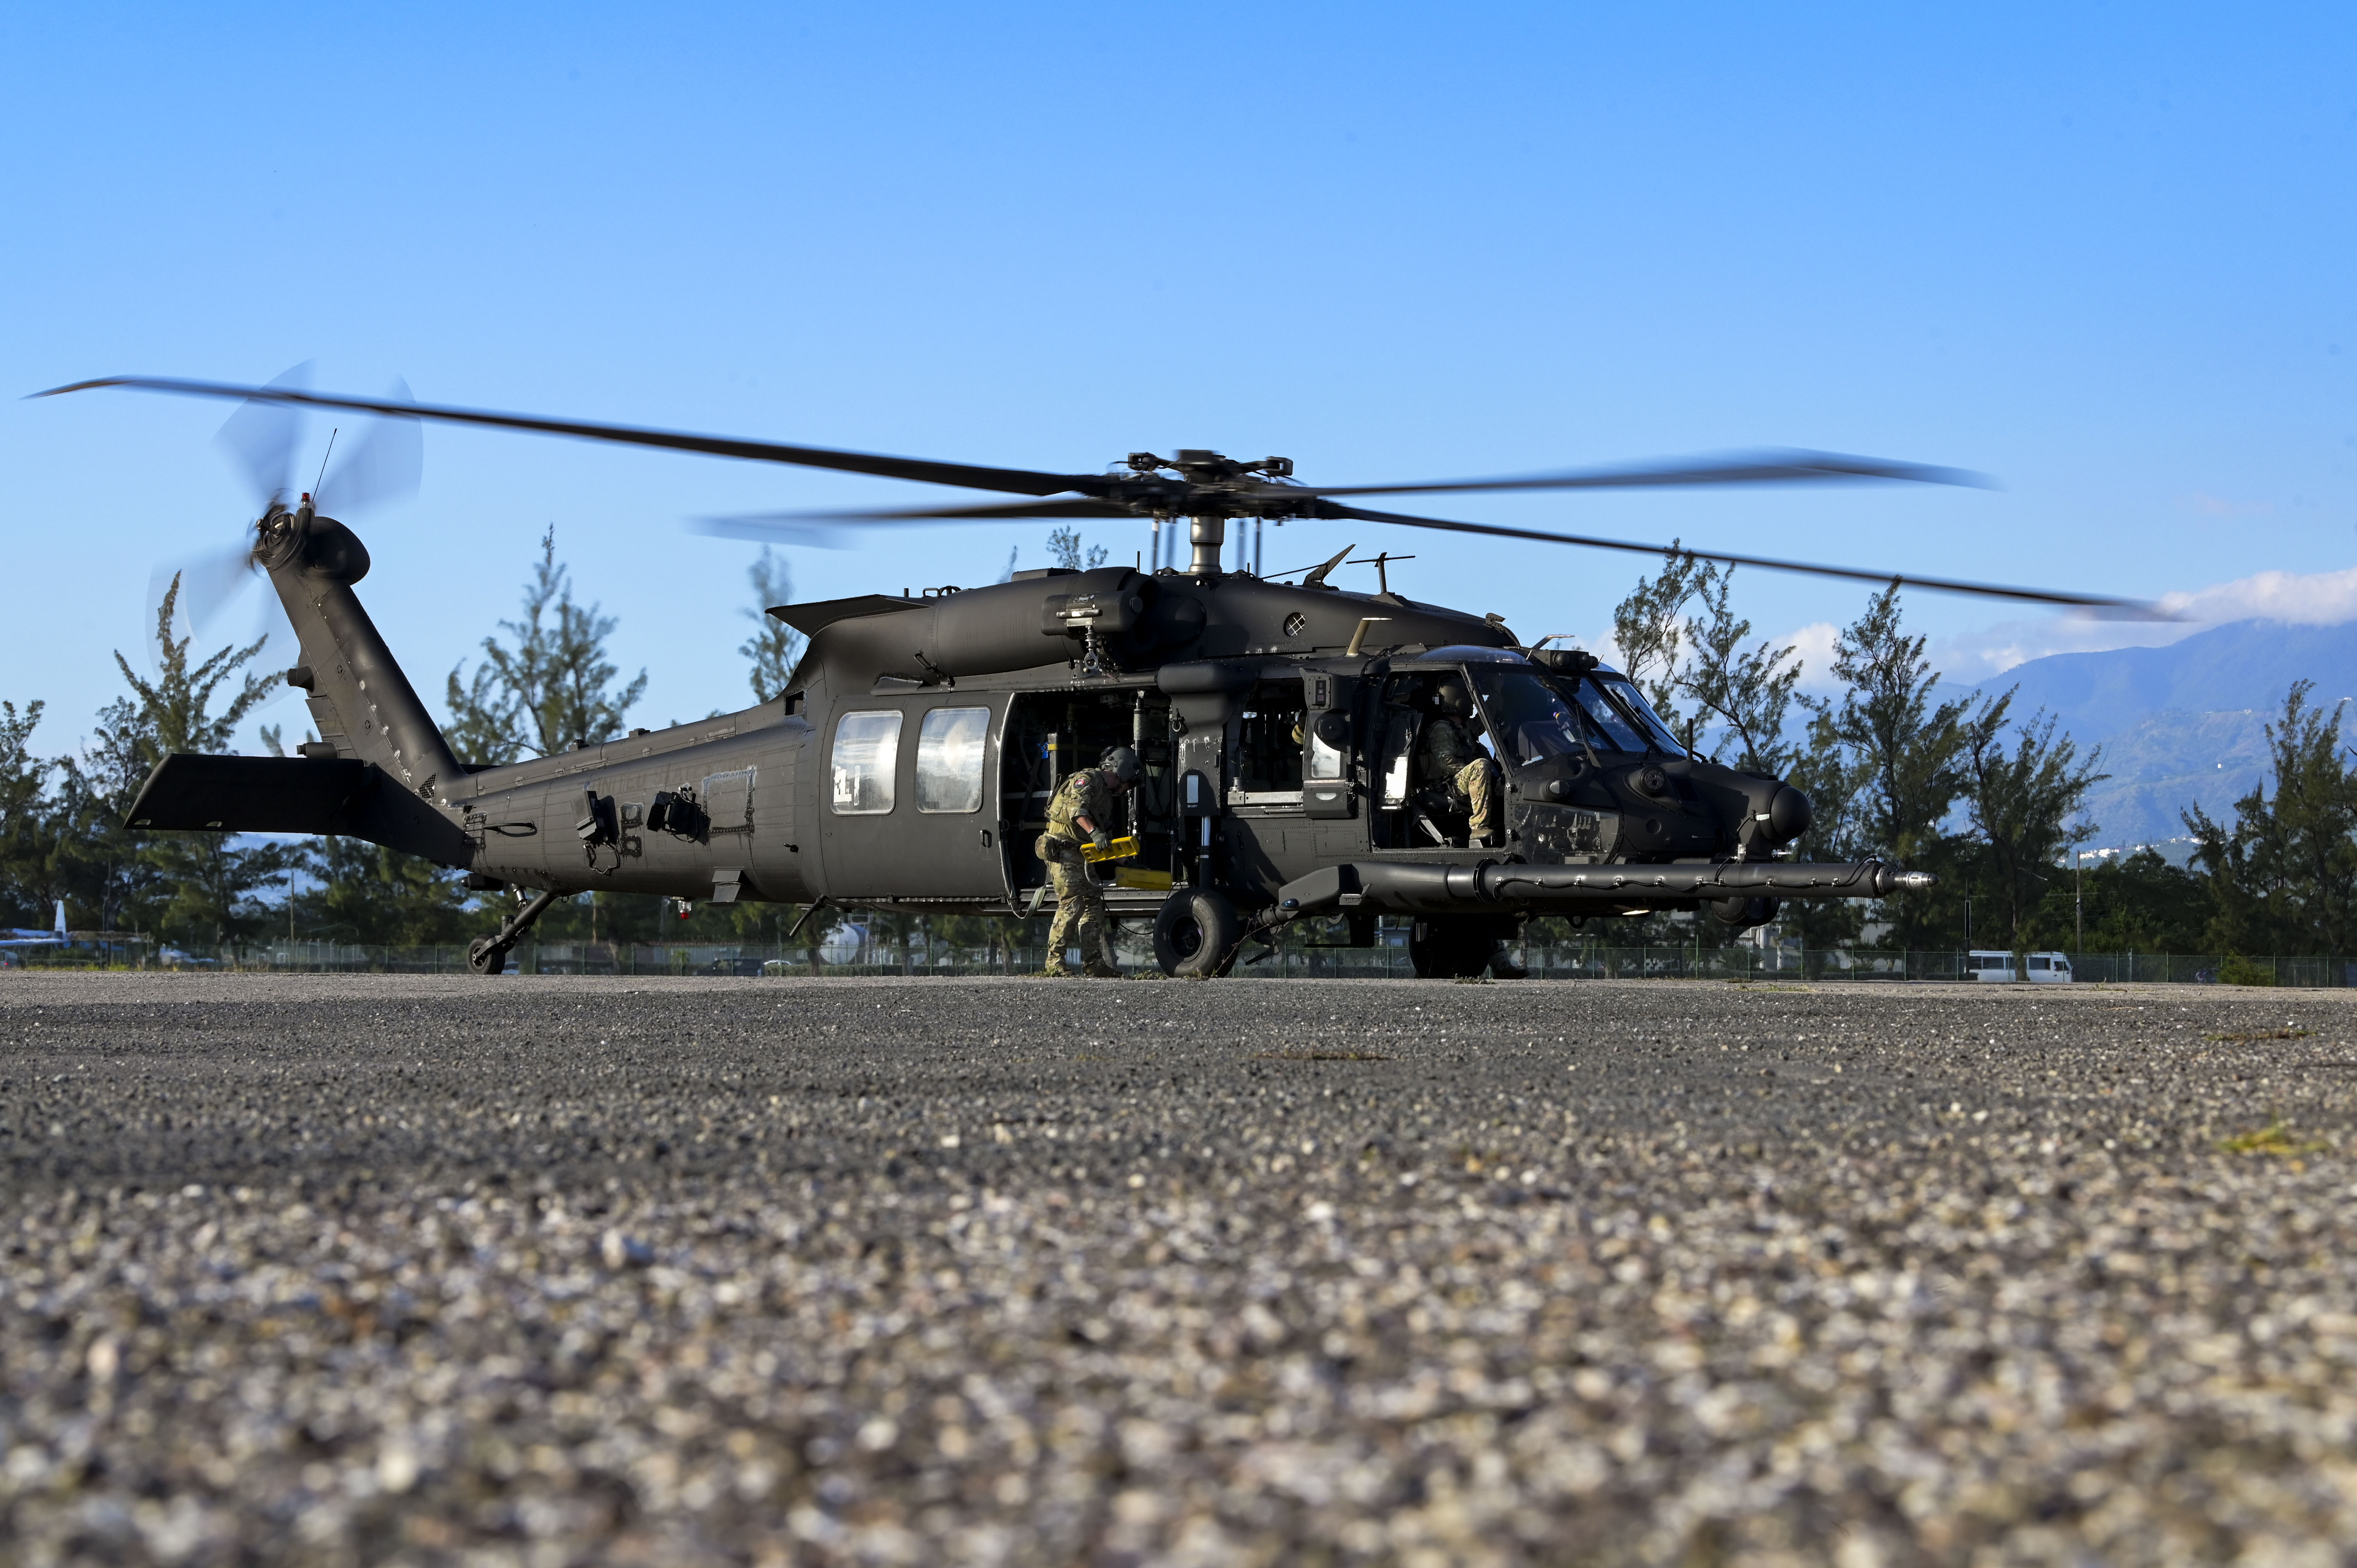 U.S. Army Soldiers assigned to the 7th Special Forces Group conduct landing procedures on an MH-60M Black Hawk helicopter, assigned to the 160th Special Operations Aviation Regiment, during exercise Tropical Dagger at Kingston, Jamaica, Feb. 22, 2024.